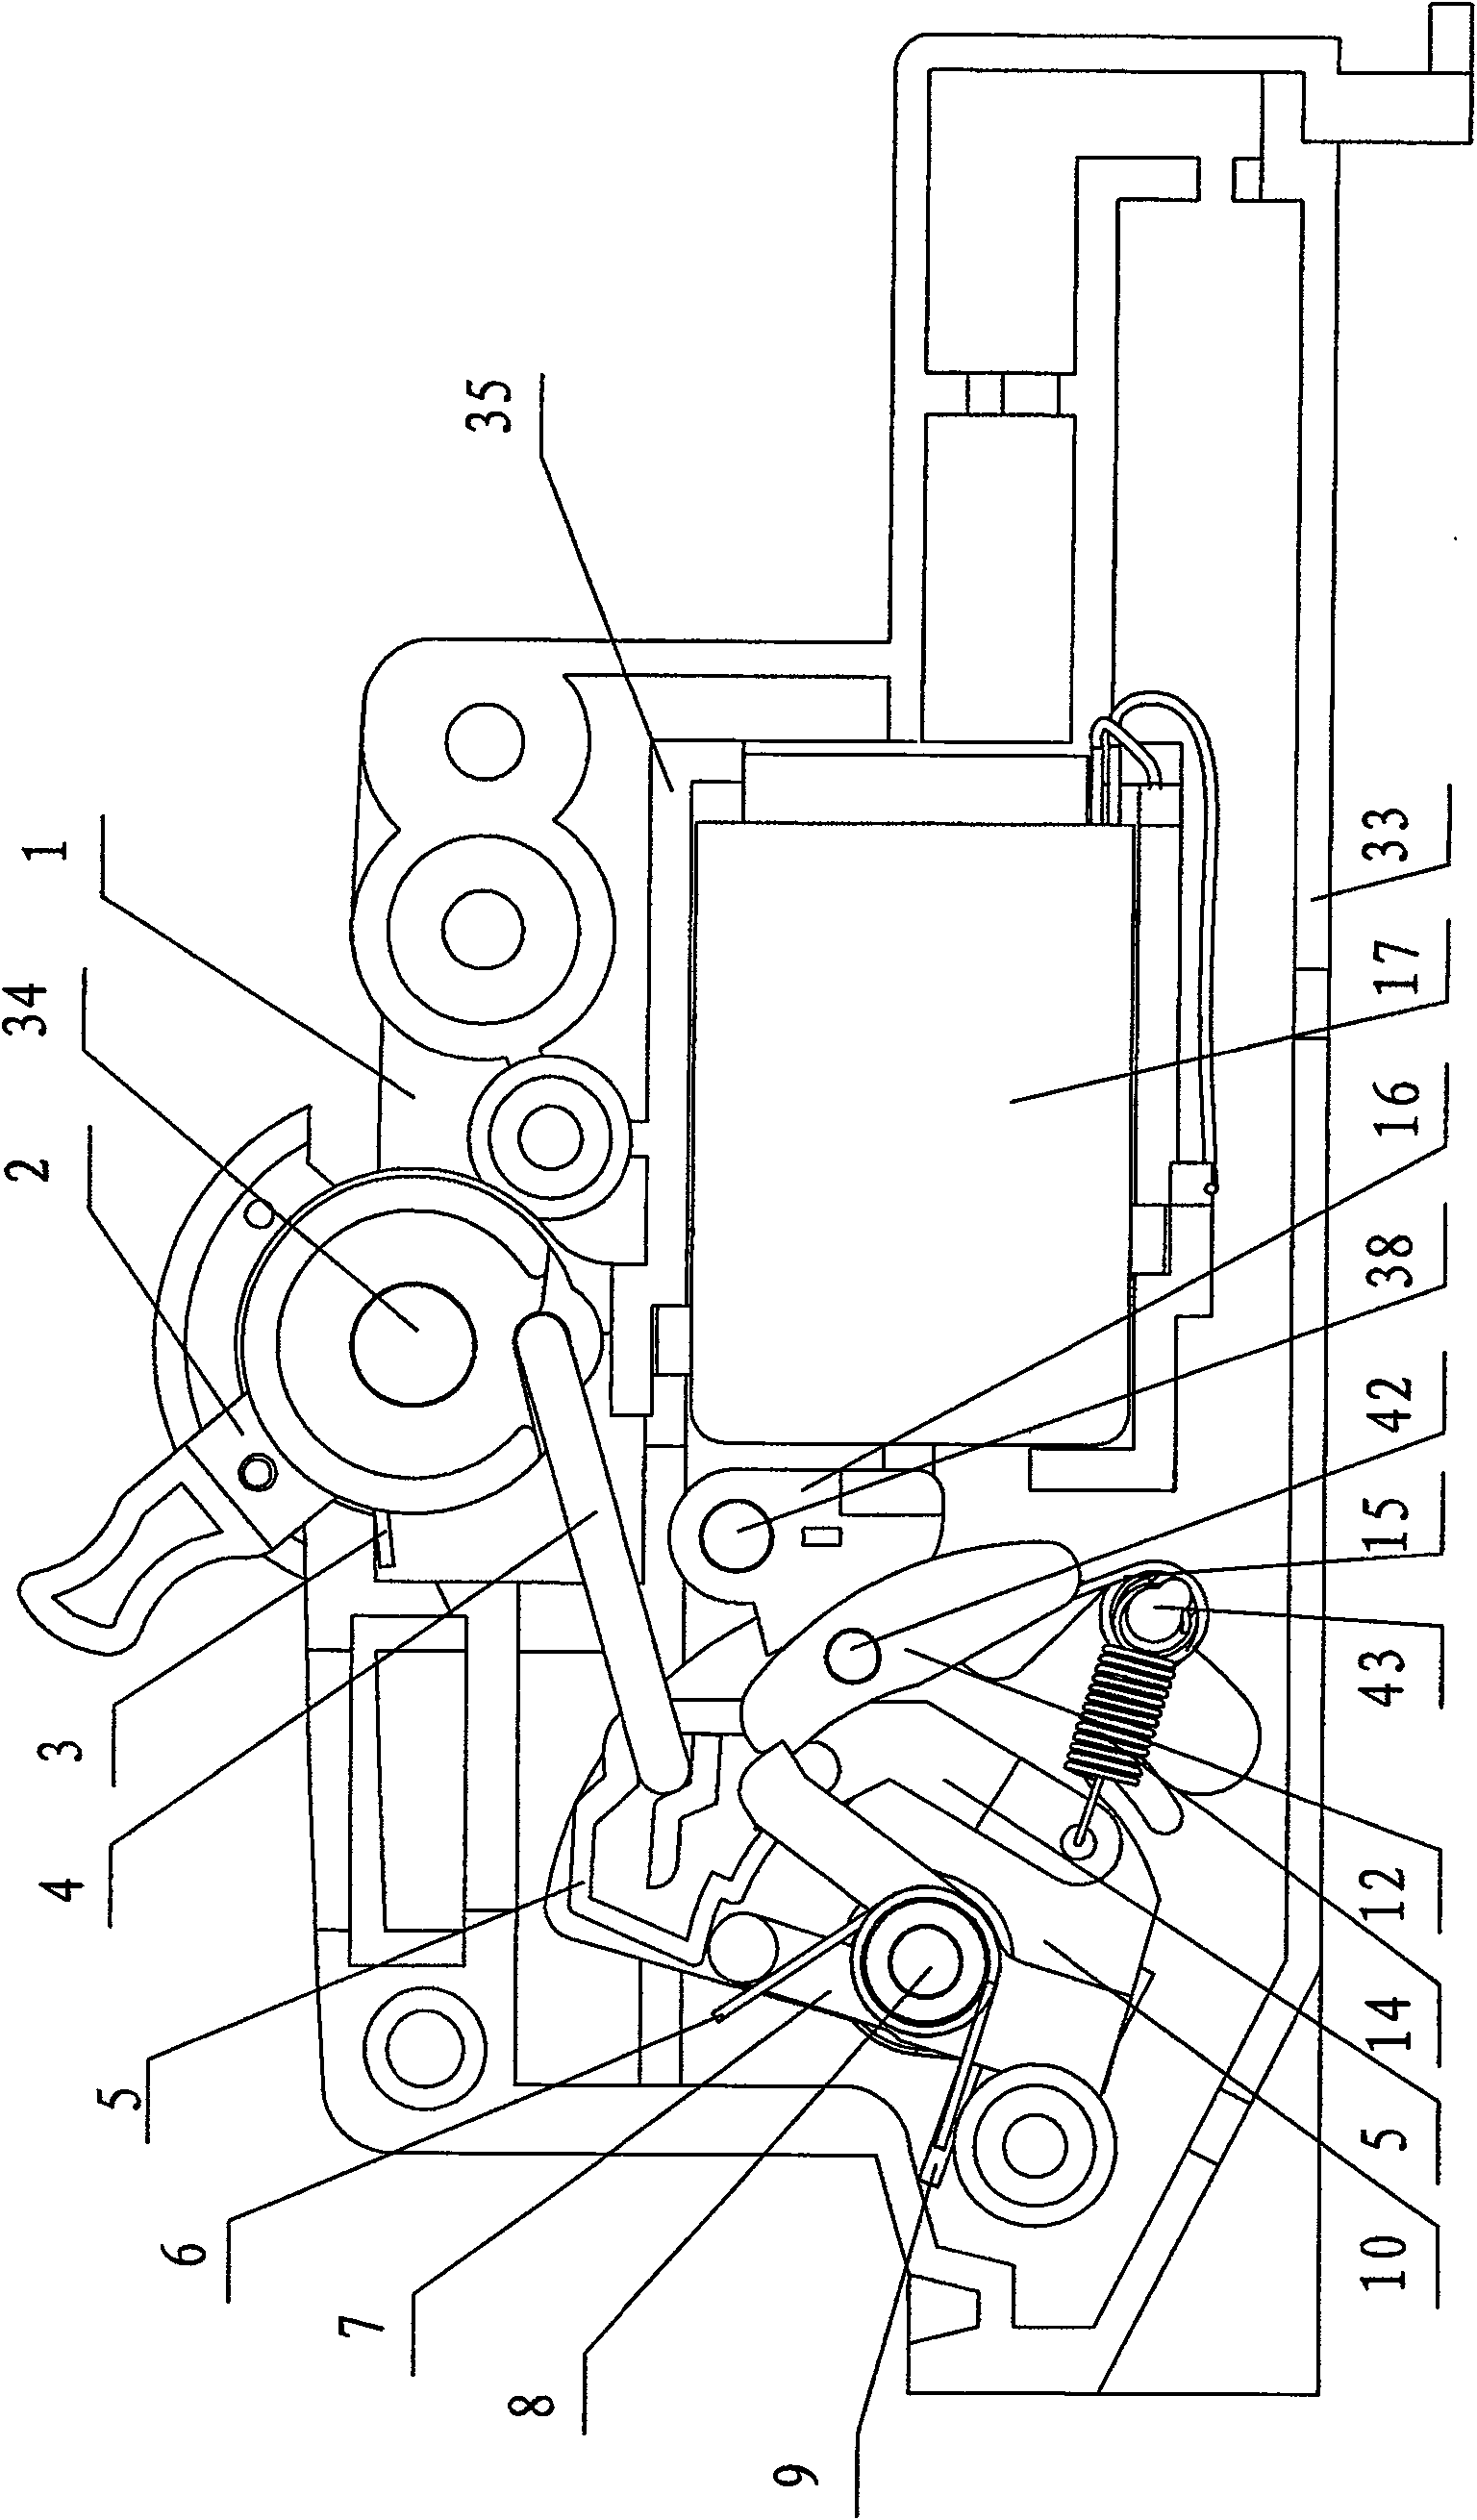 Electromagnetical type residual current movement protectors mechanism